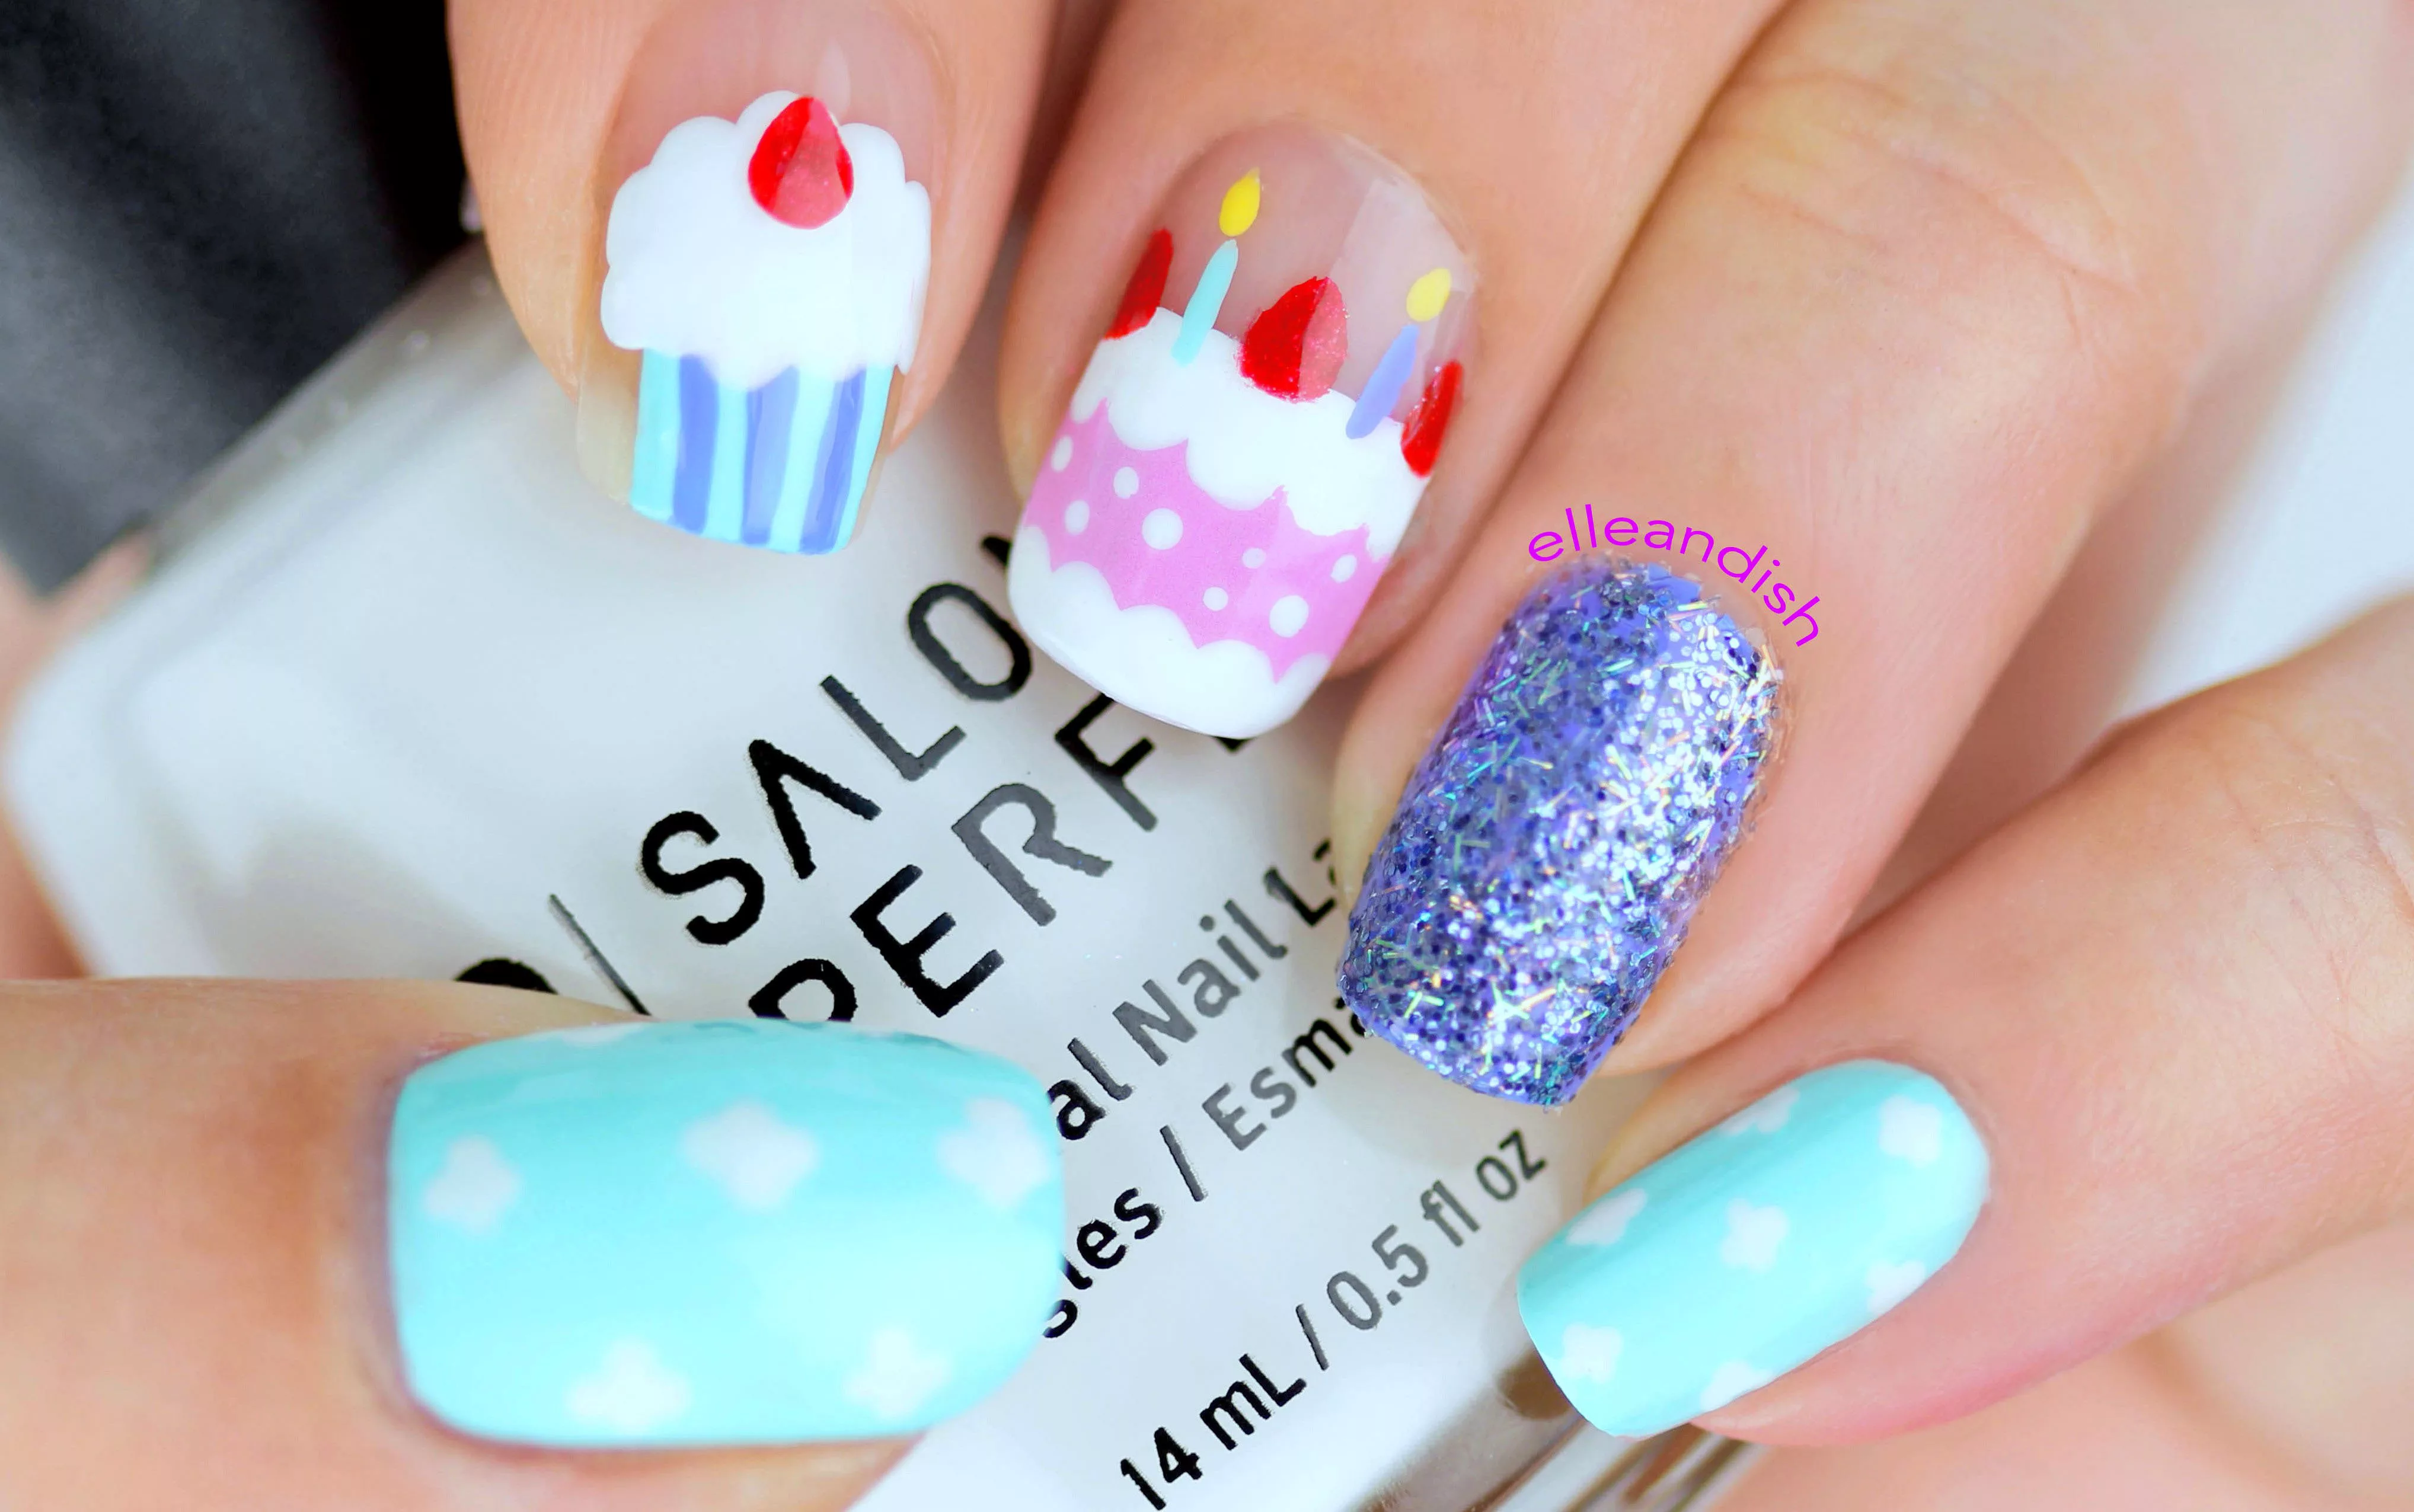 10. Birthday candle coffin nails - wide 6